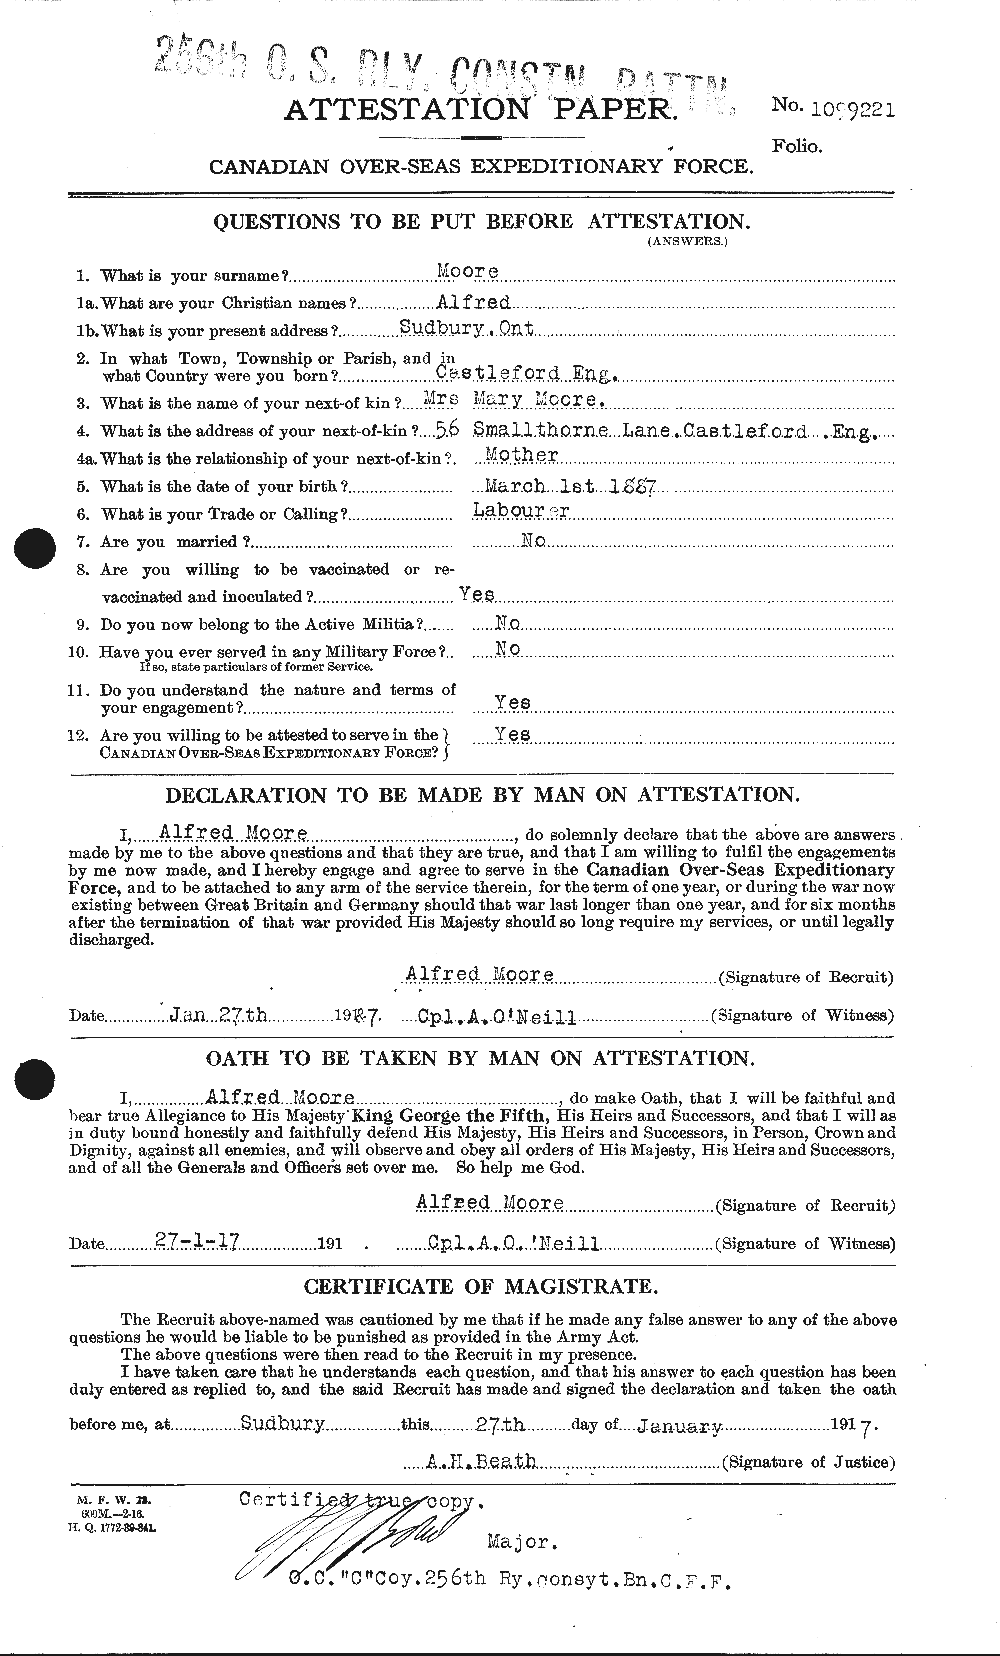 Personnel Records of the First World War - CEF 506375a